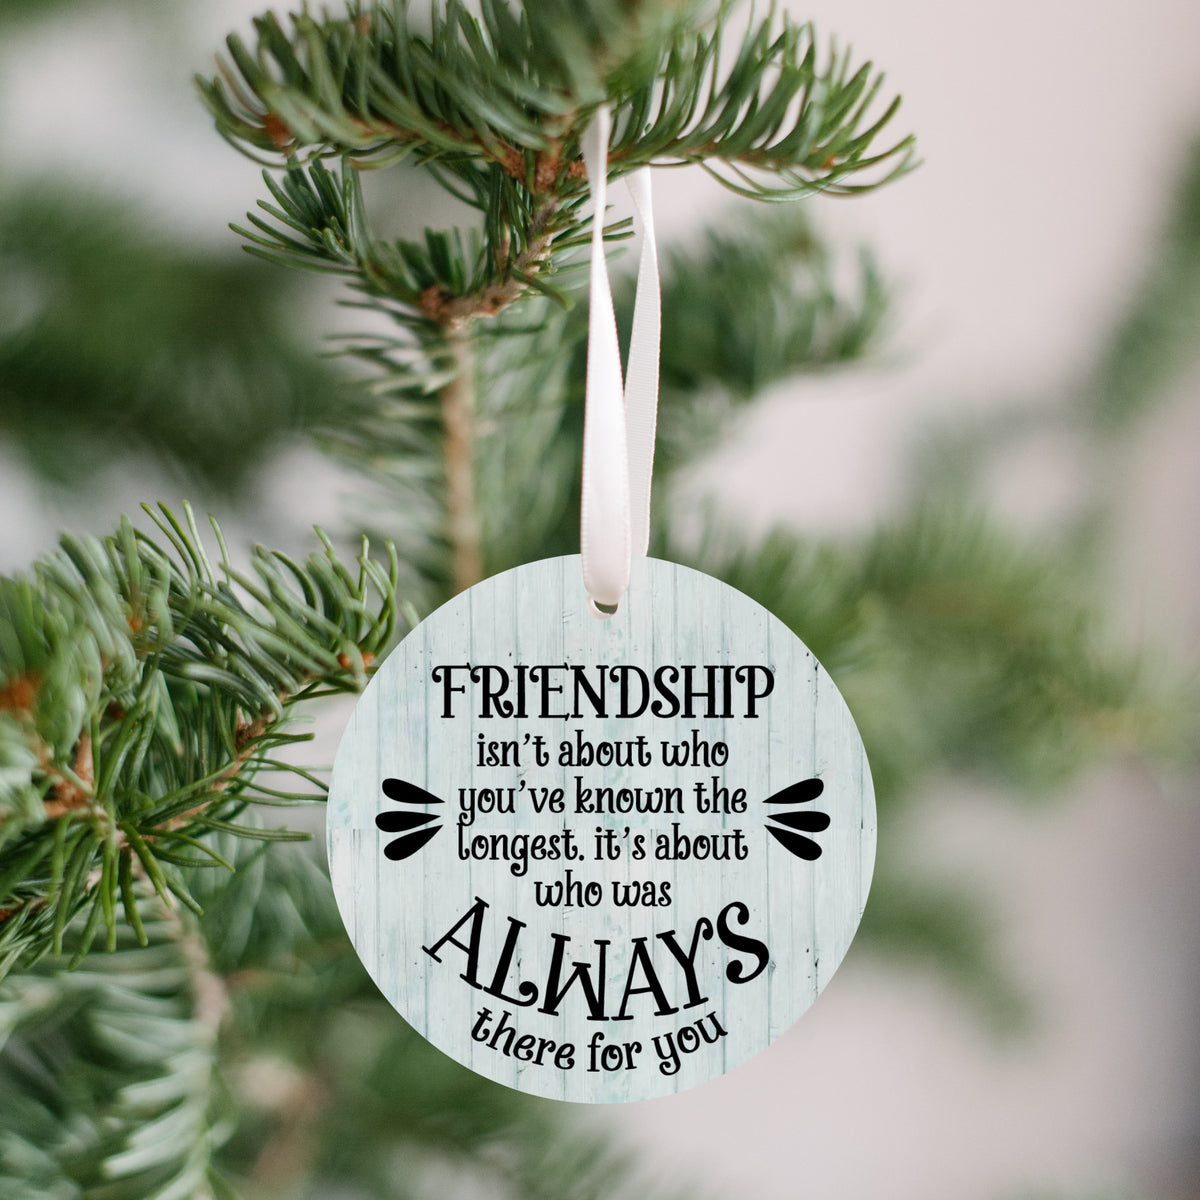 Ornament Gift For Friend - Friendship Isn't About Who You've Known The Longest Plastic Ornament